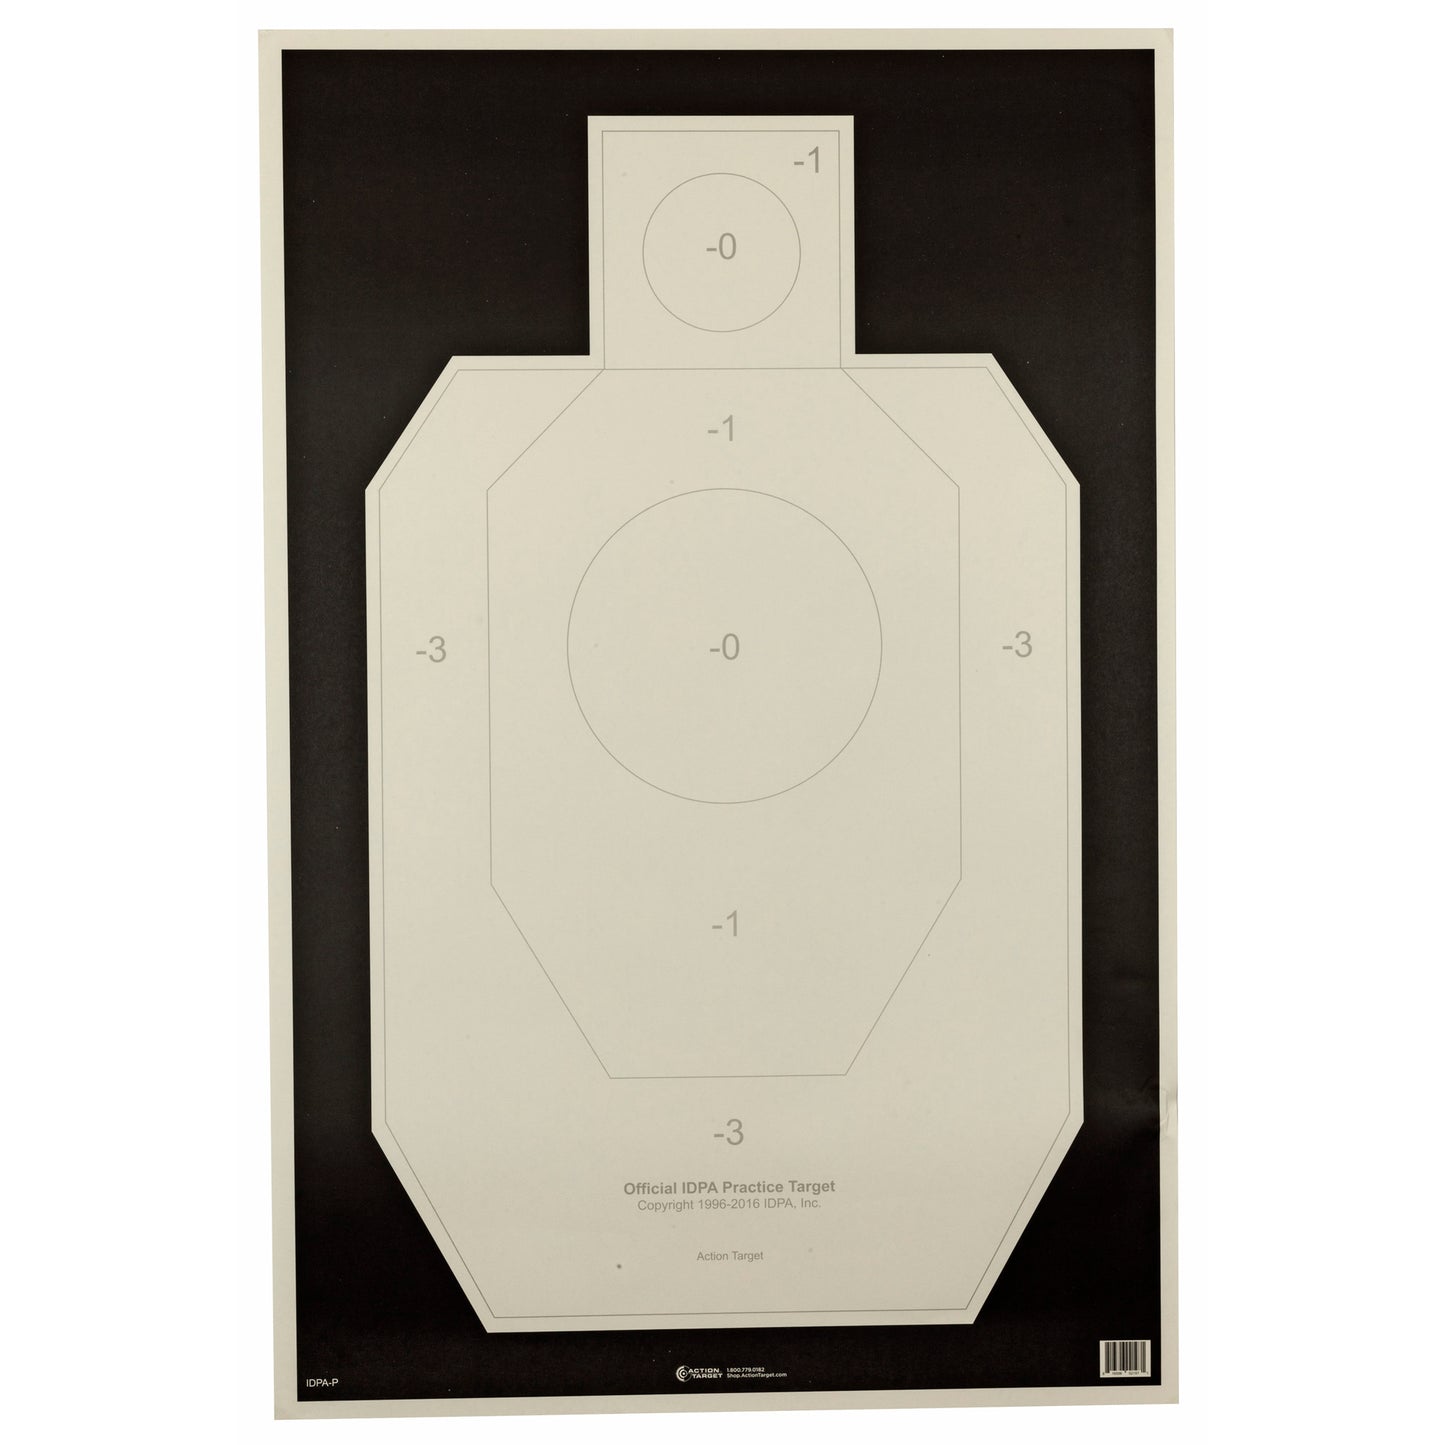 Action Target Officially Licensed IDPA Practice Target 23" x 35"  100 Per Box